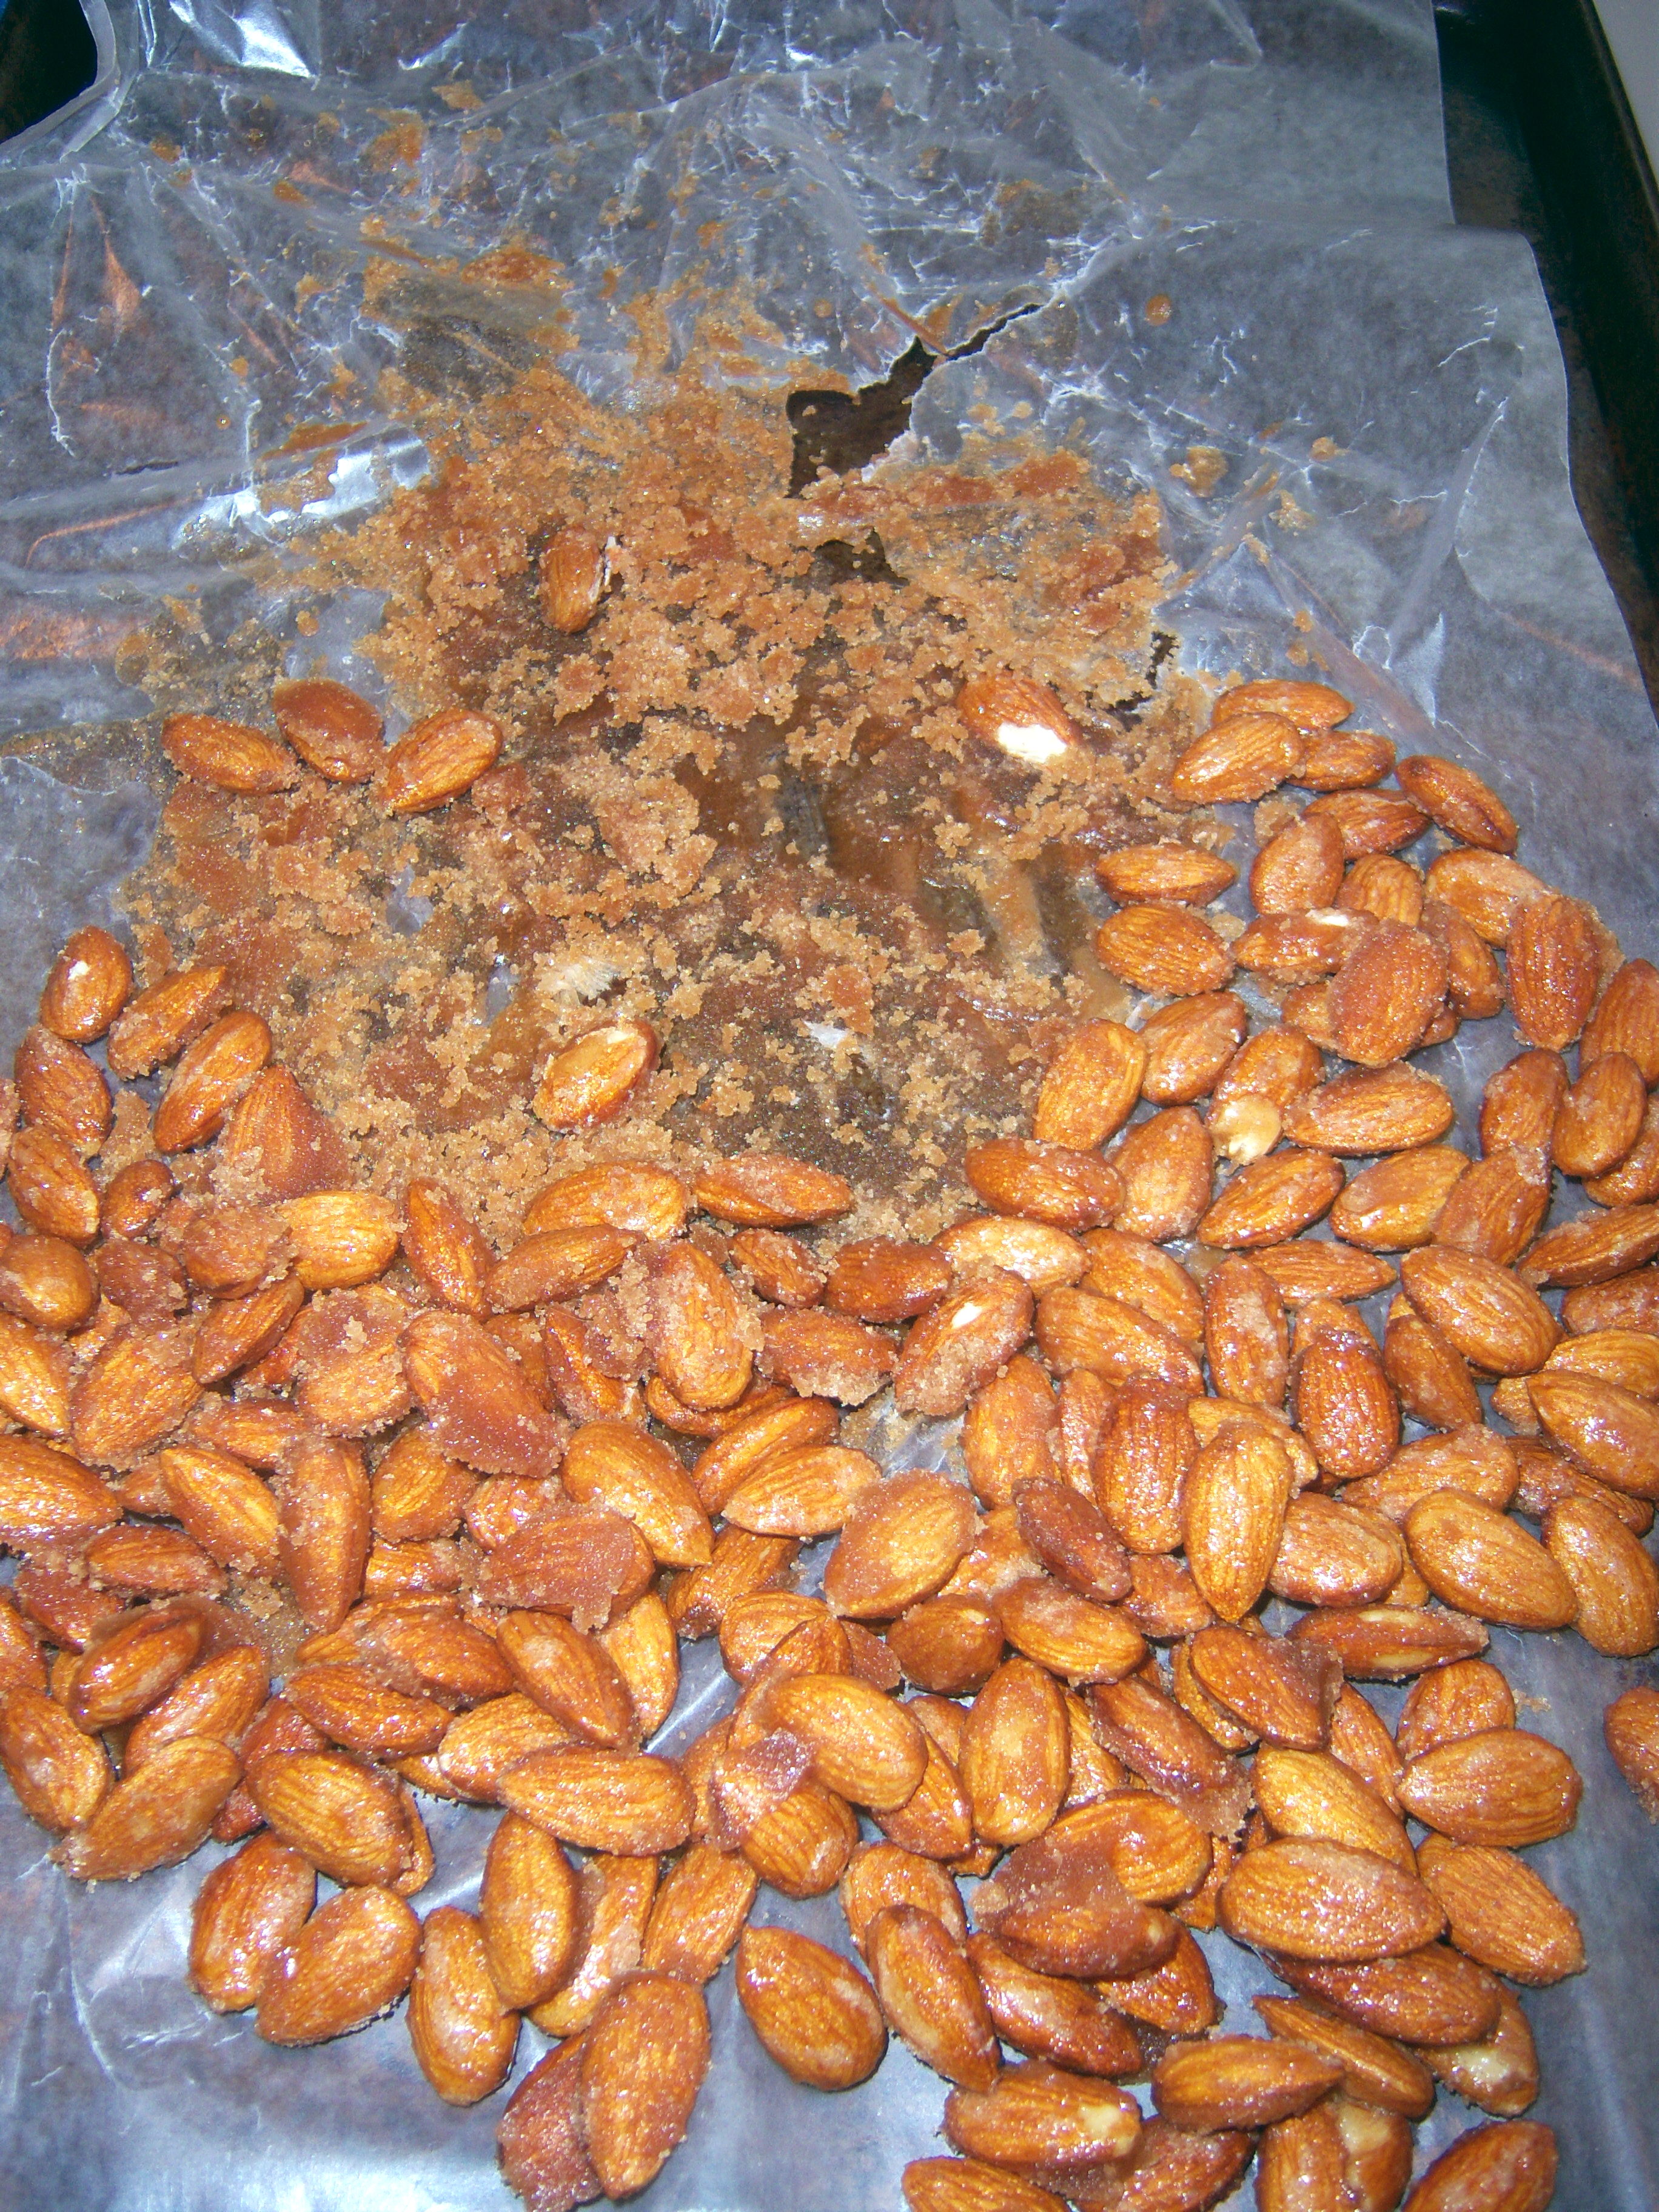 Almonds after cooking